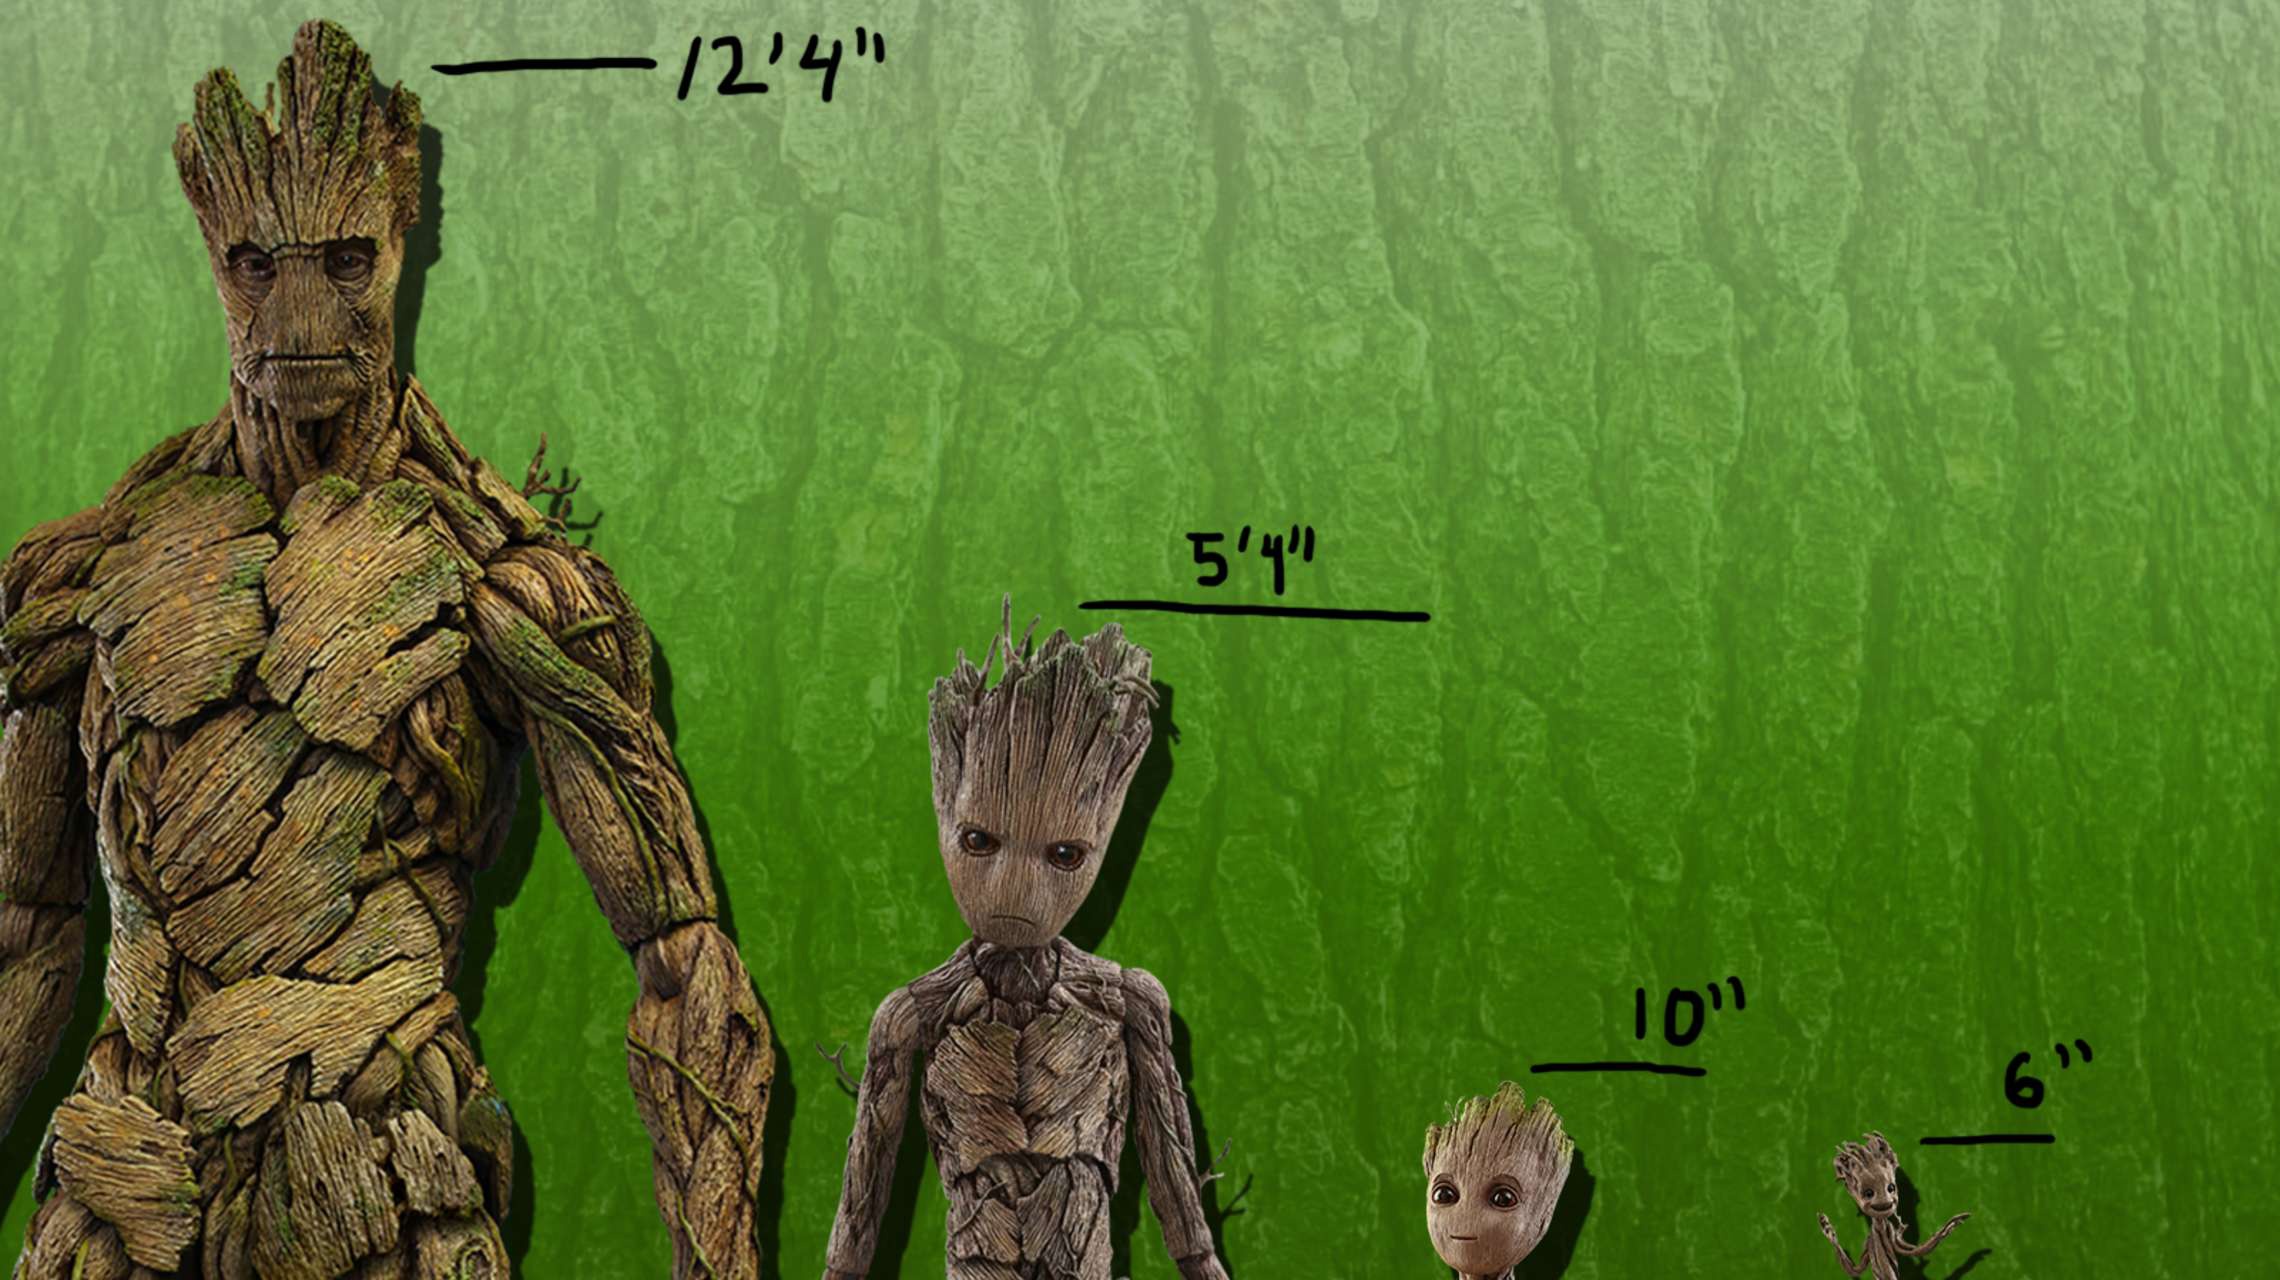 When will Groot be back to normal (the adult version)?